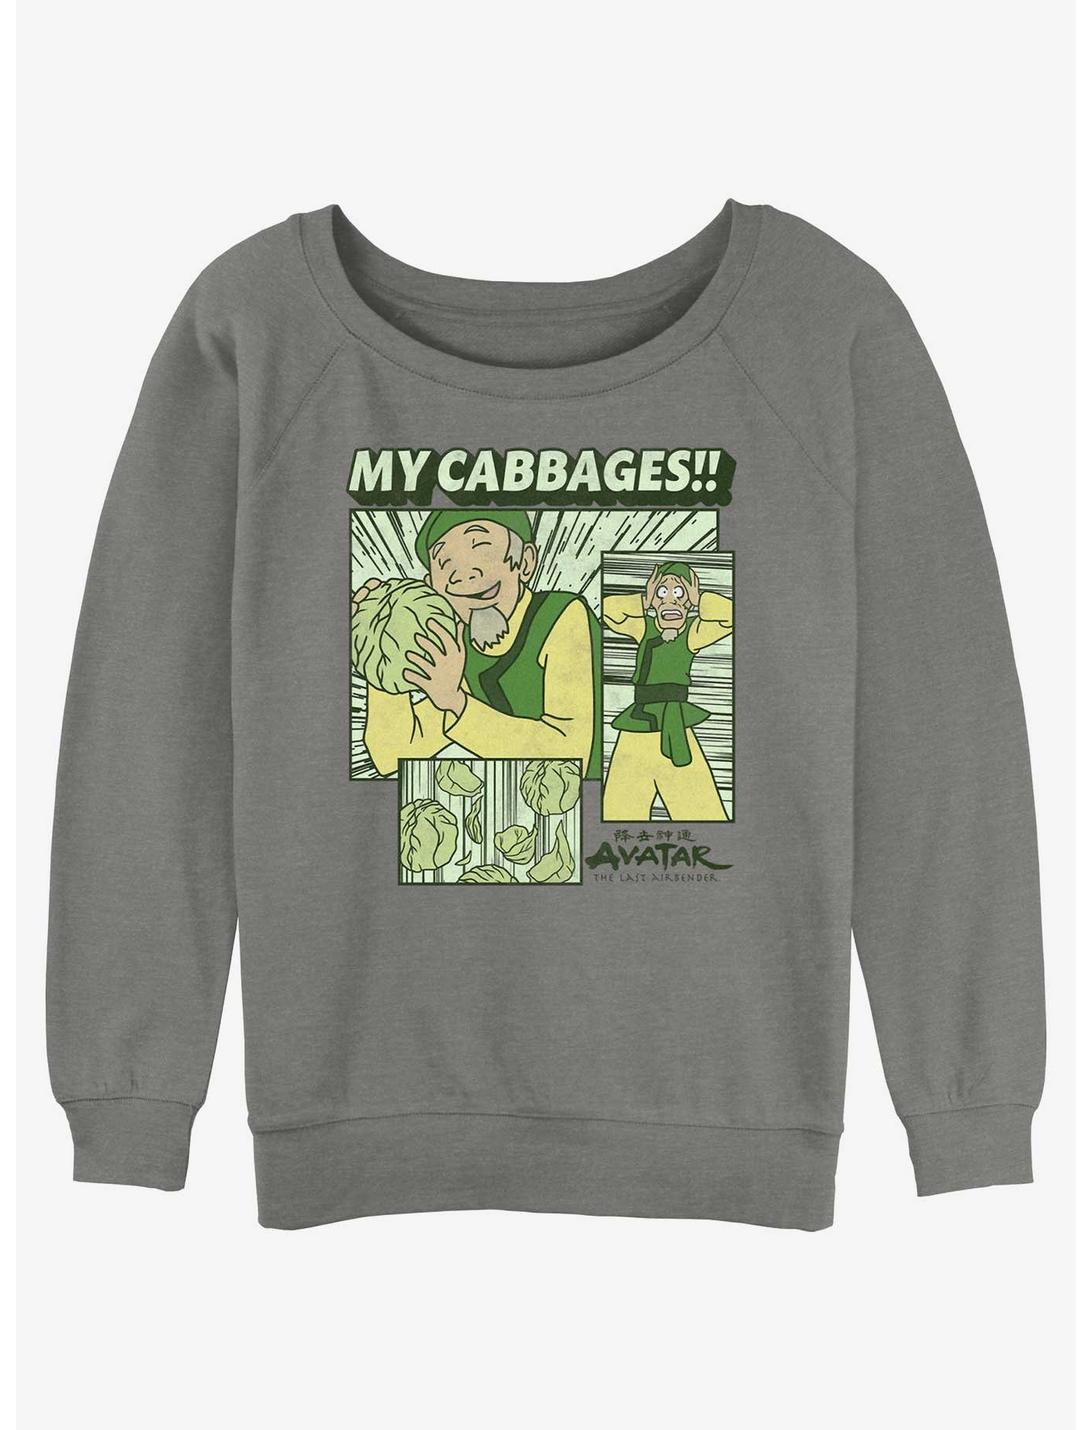 Avatar: The Last Airbender My Cabbages Girls Slouchy Sweatshirt, GRAY HTR, hi-res